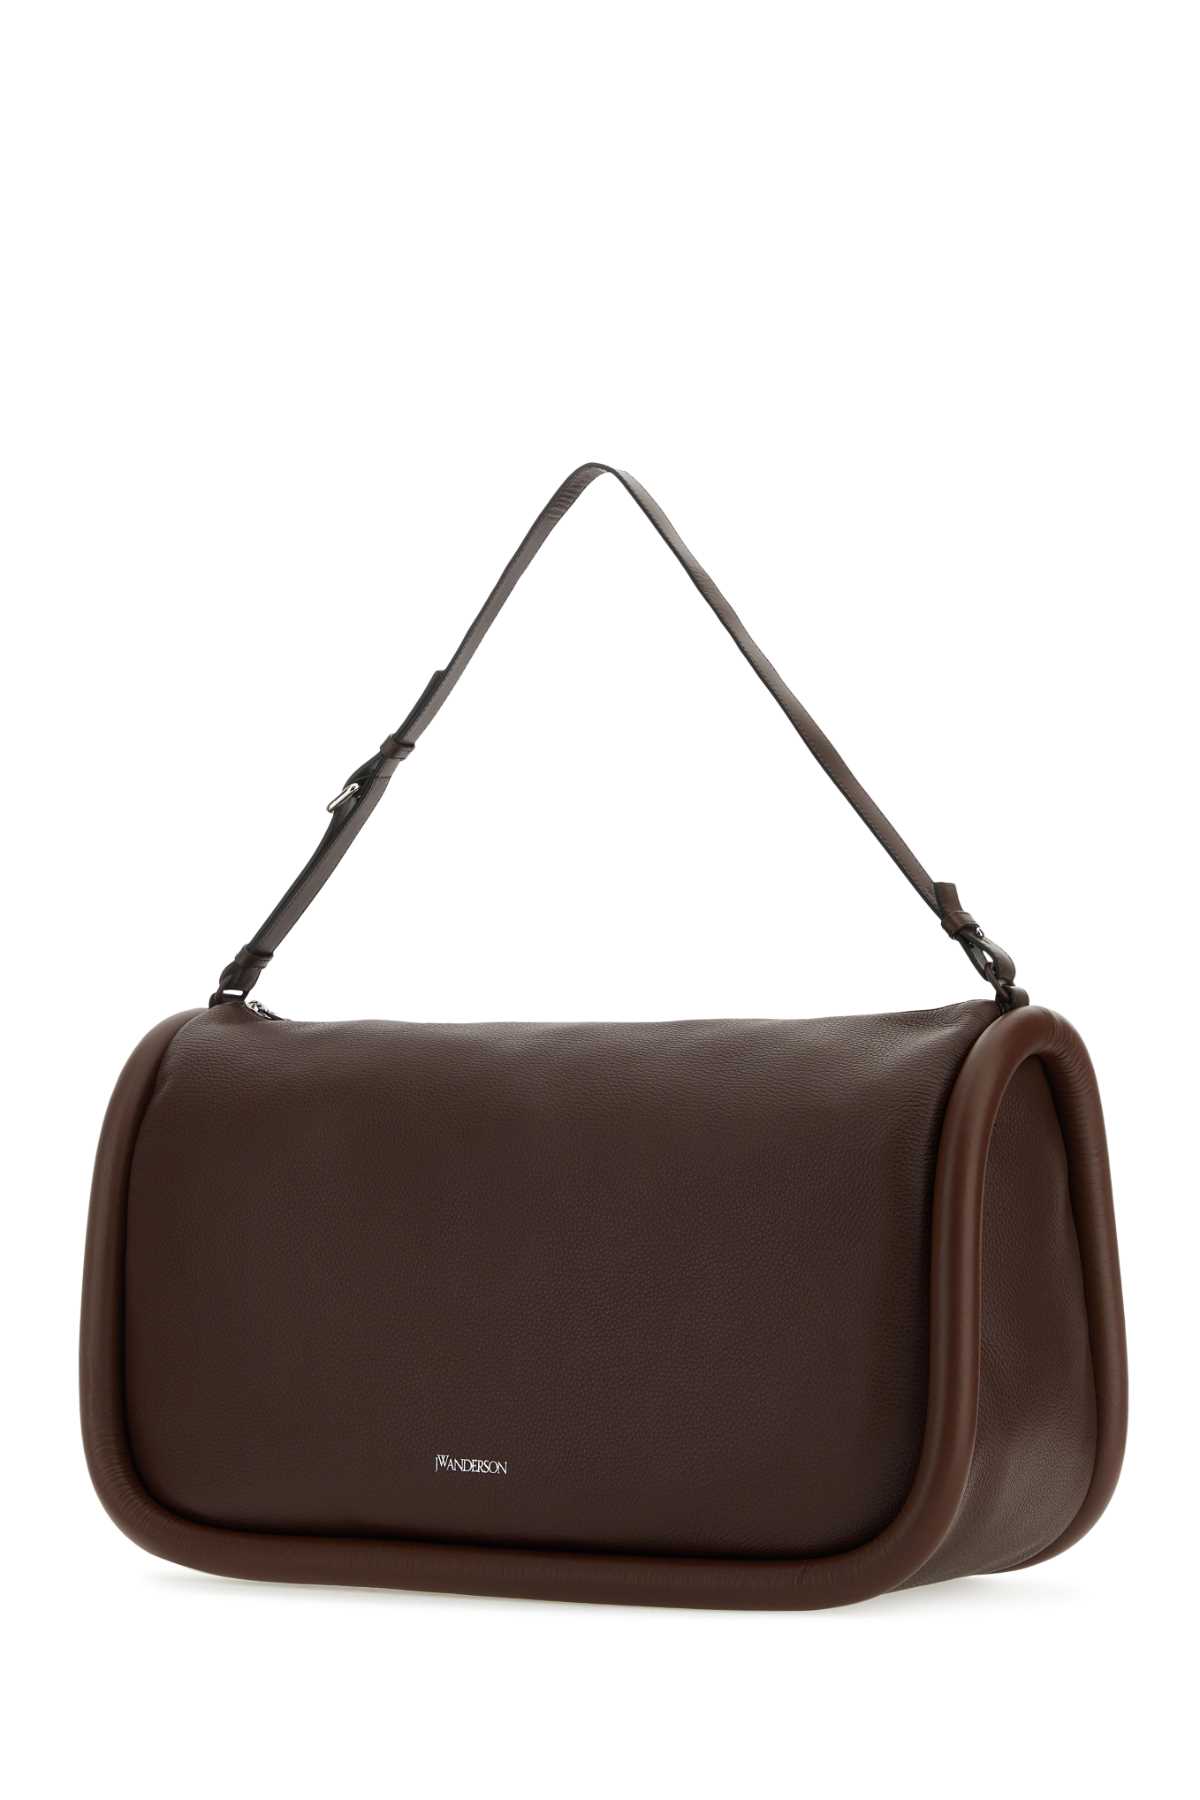 JW ANDERSON CHOCOLATE LEATHER BUMPER-36 TRAVEL BAG